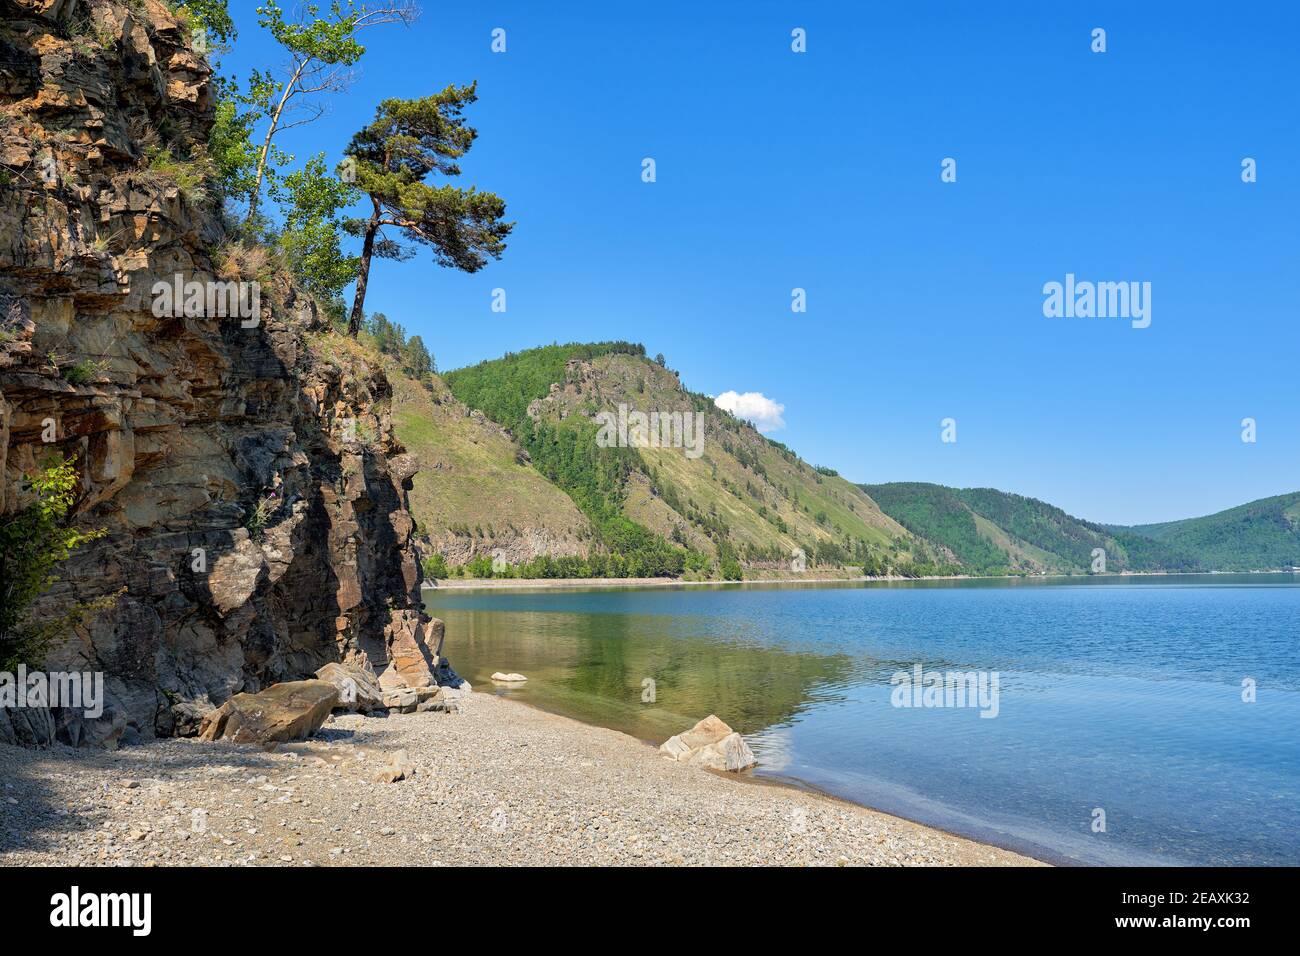 Baikal landscape on a sunny summer day. A pine tree leaned over the edge of the cliff above the water. Irkutsk region. Russia Stock Photo